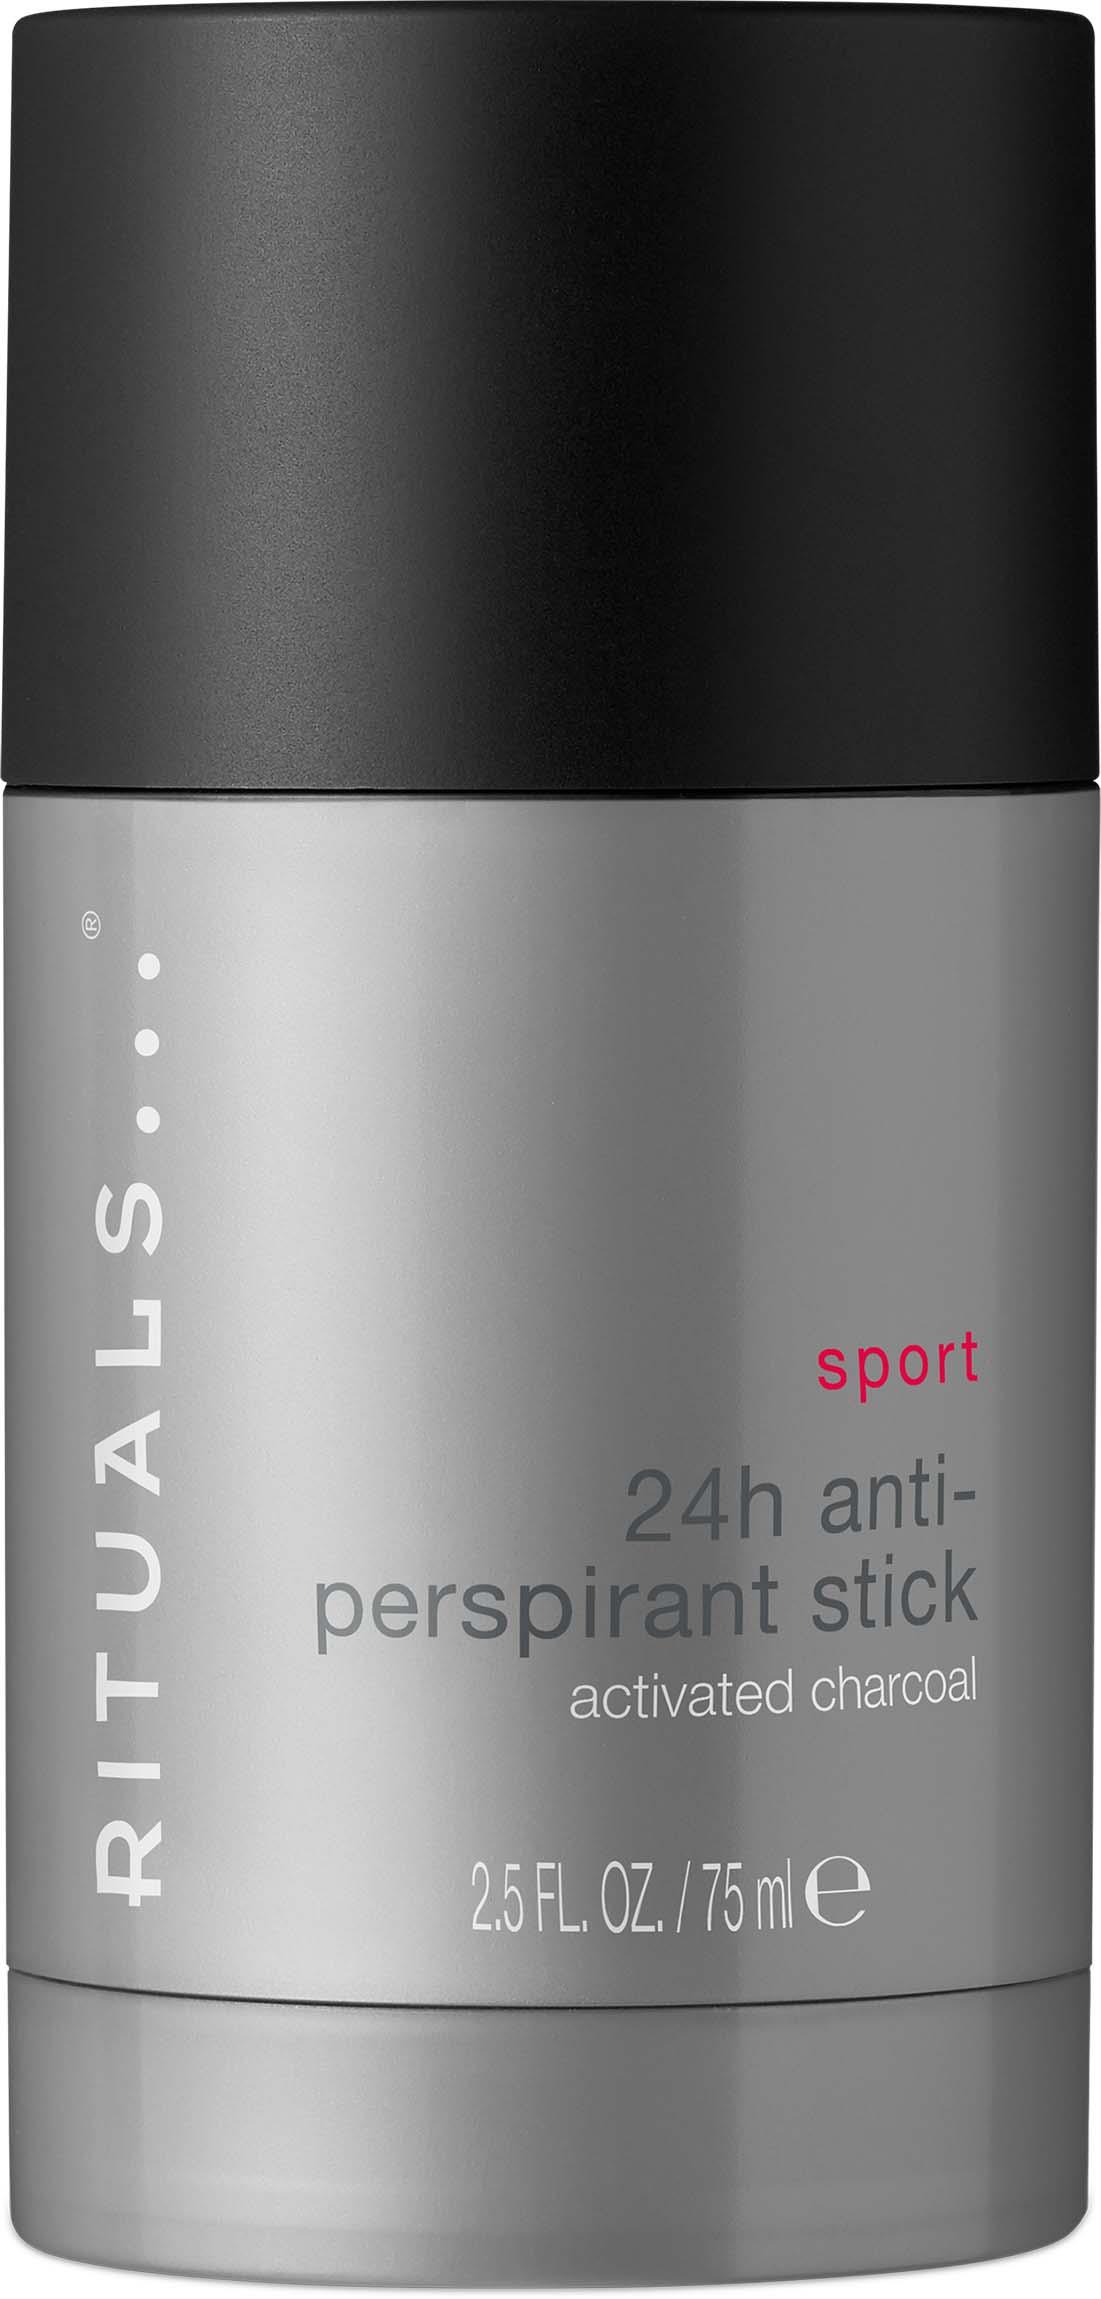 https://lyko.com/globalassets/product-images/rituals-sport-24h-anti-perspirant-stick-75-ml-1808-871-0075_1.jpg?ref=653F7A9072&w=1101&h=2299&quality=75